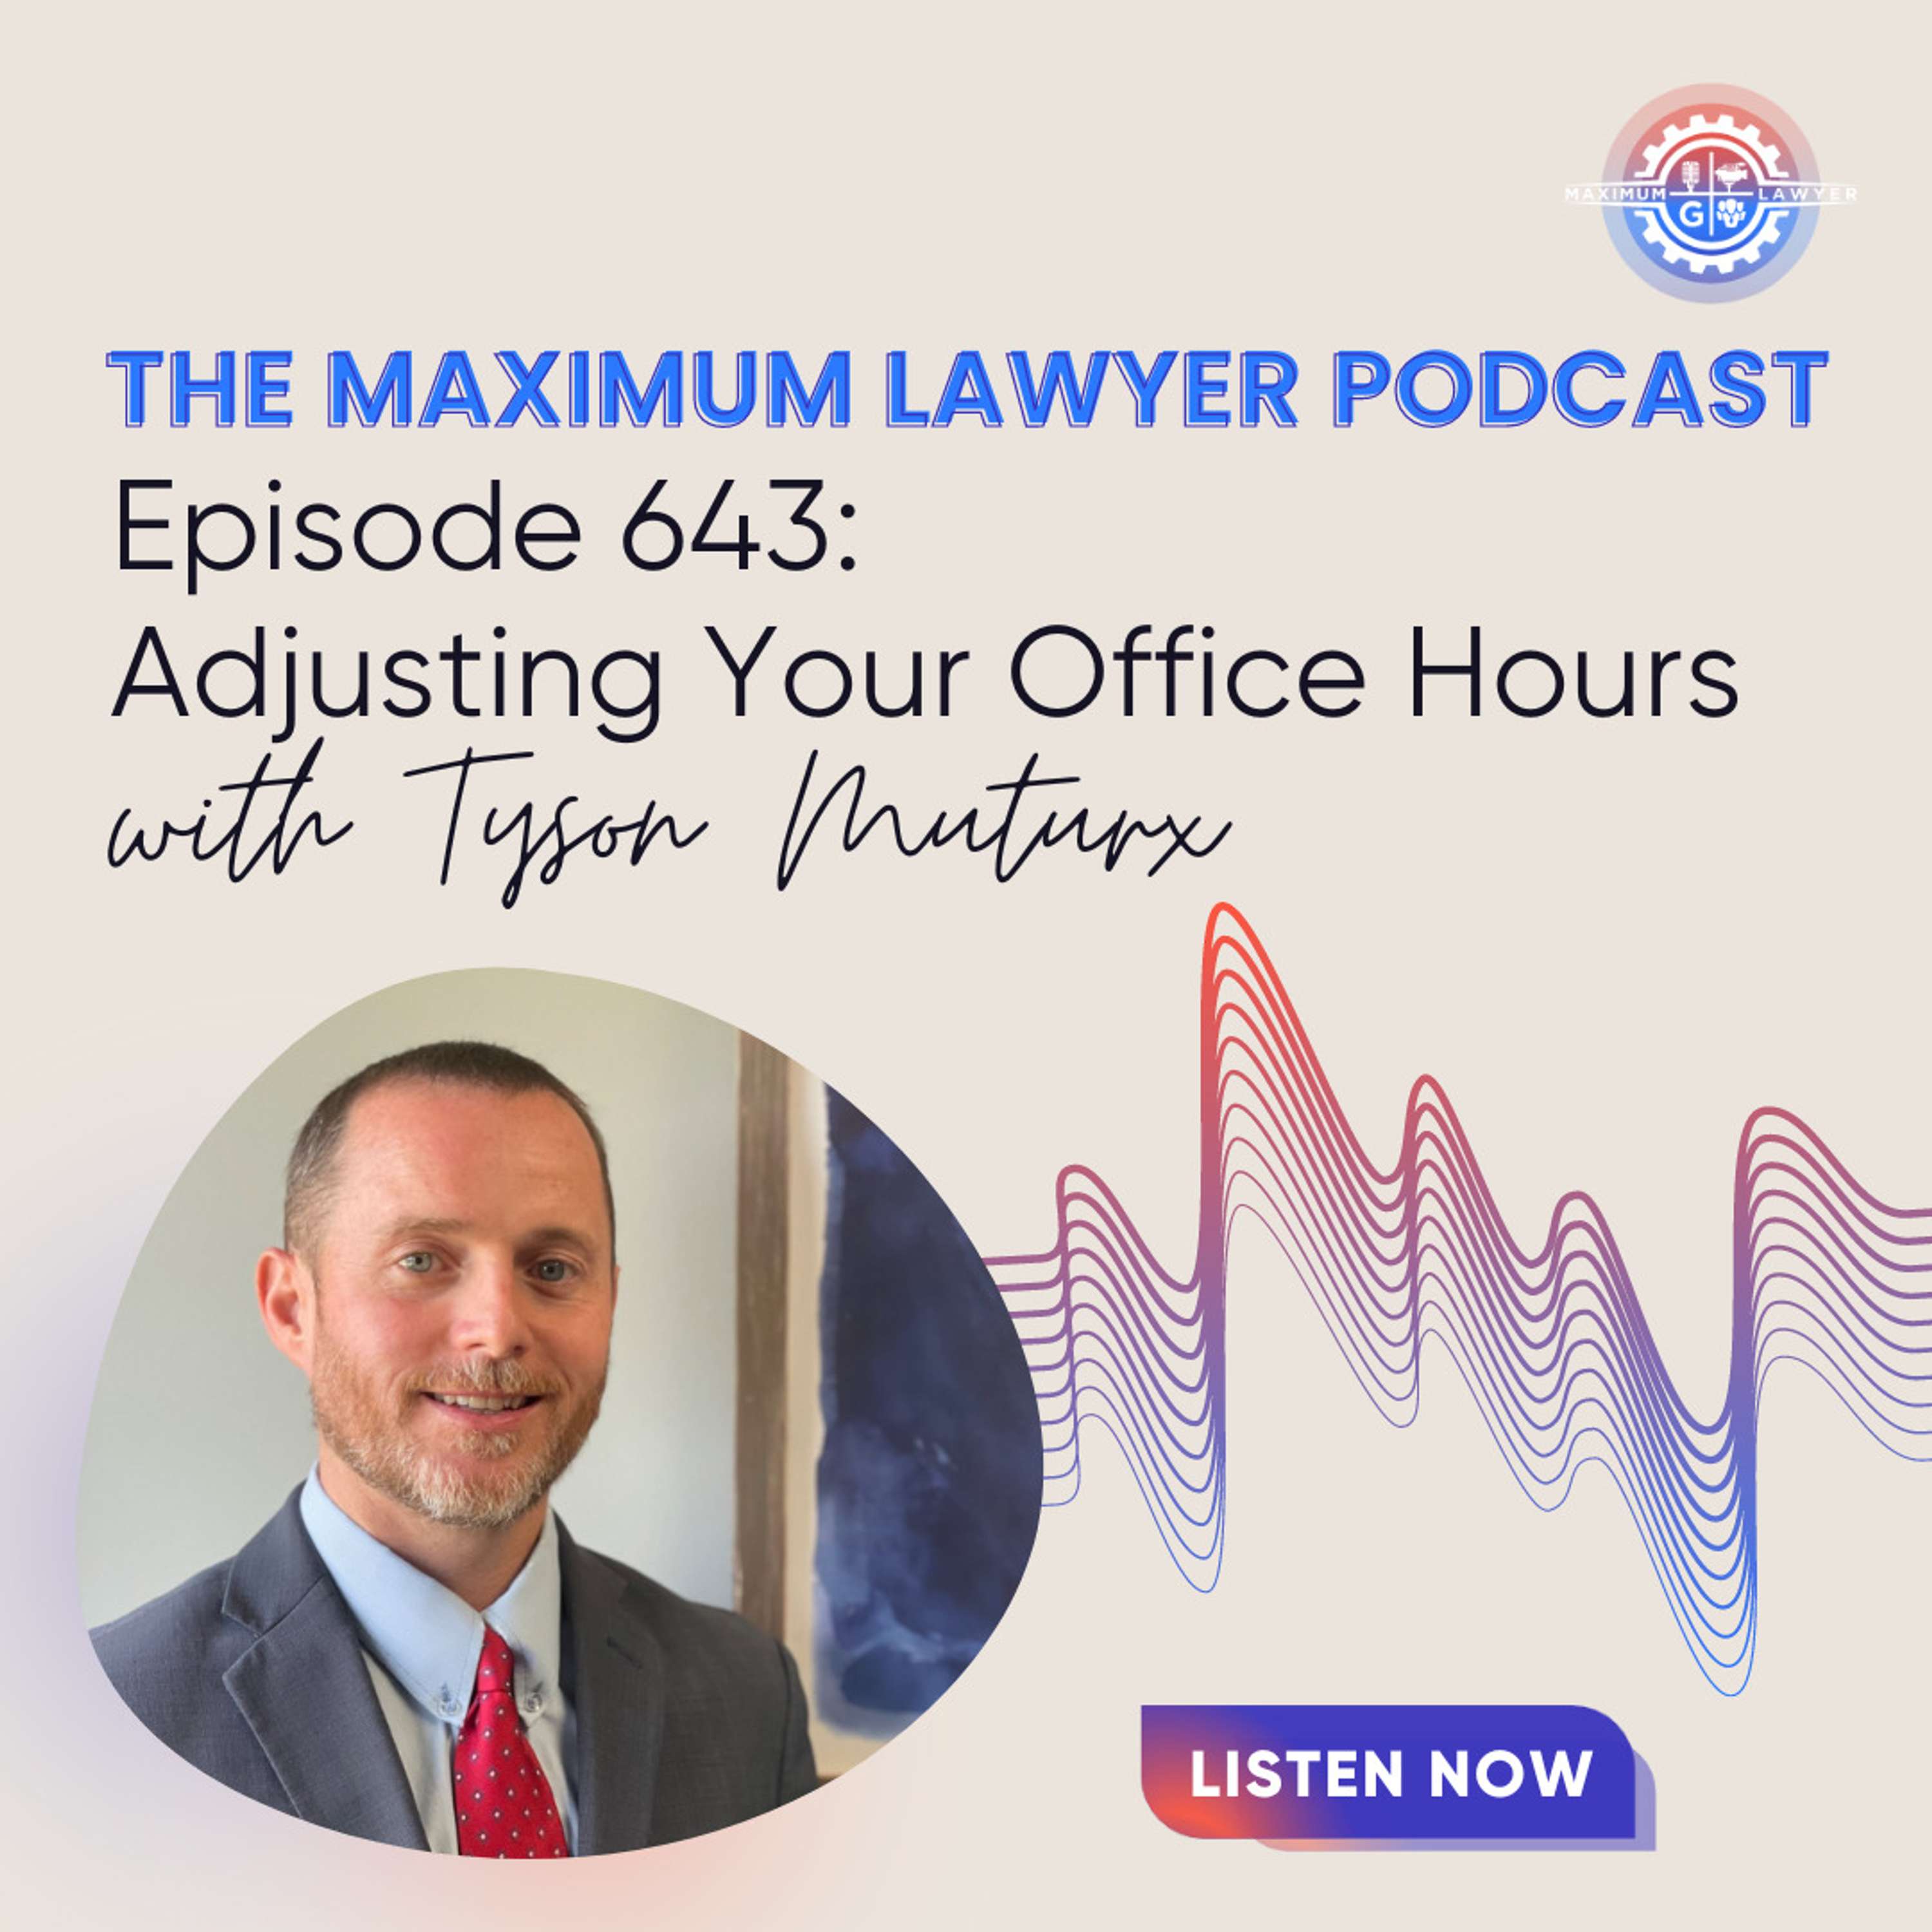 Adjusting Your Office Hours with Tyson Mutrux